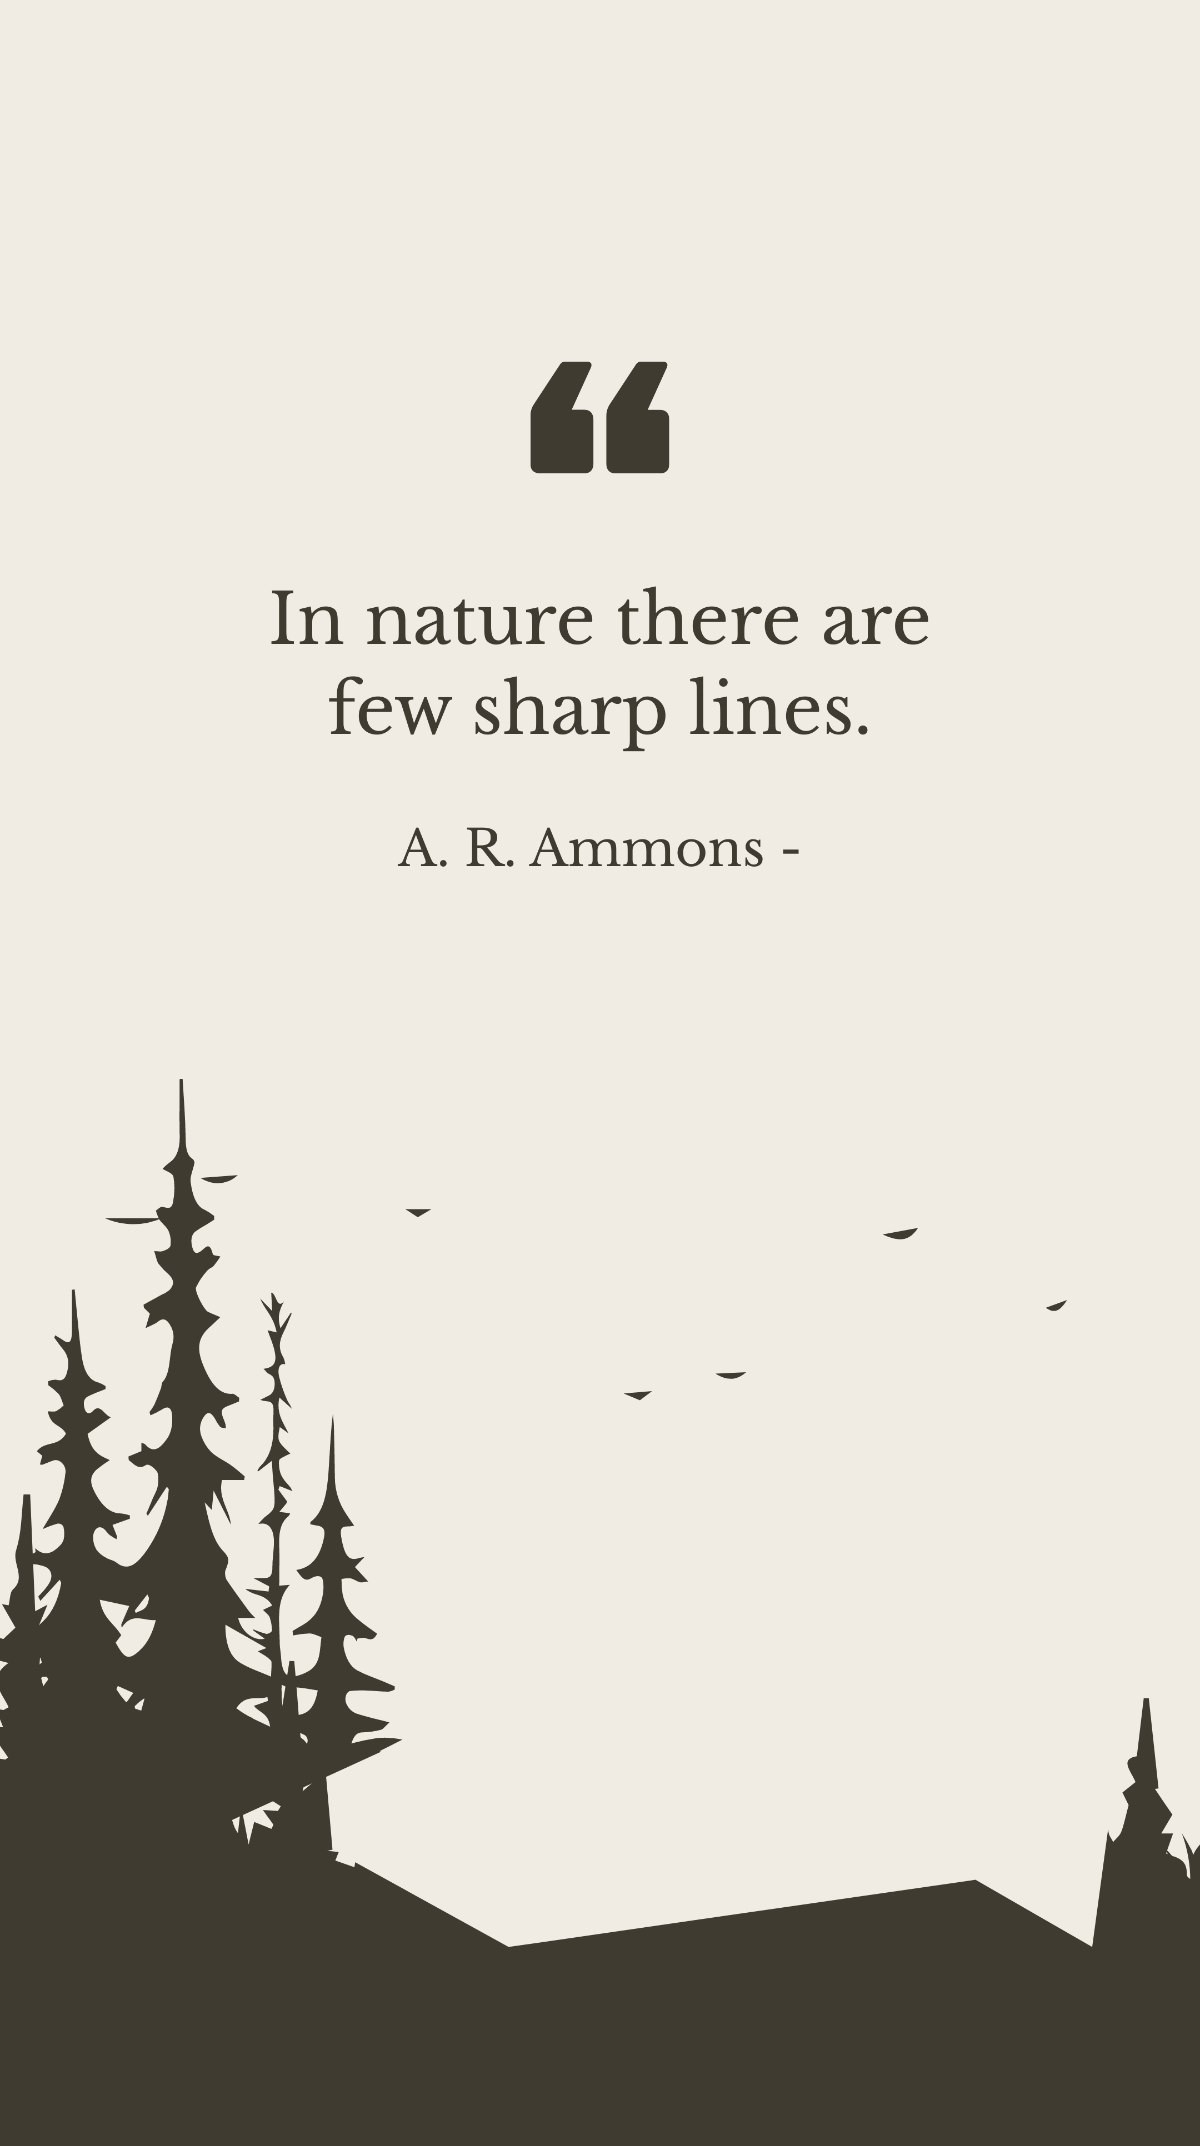 Free A. R. Ammons - In nature there are few sharp lines. Template